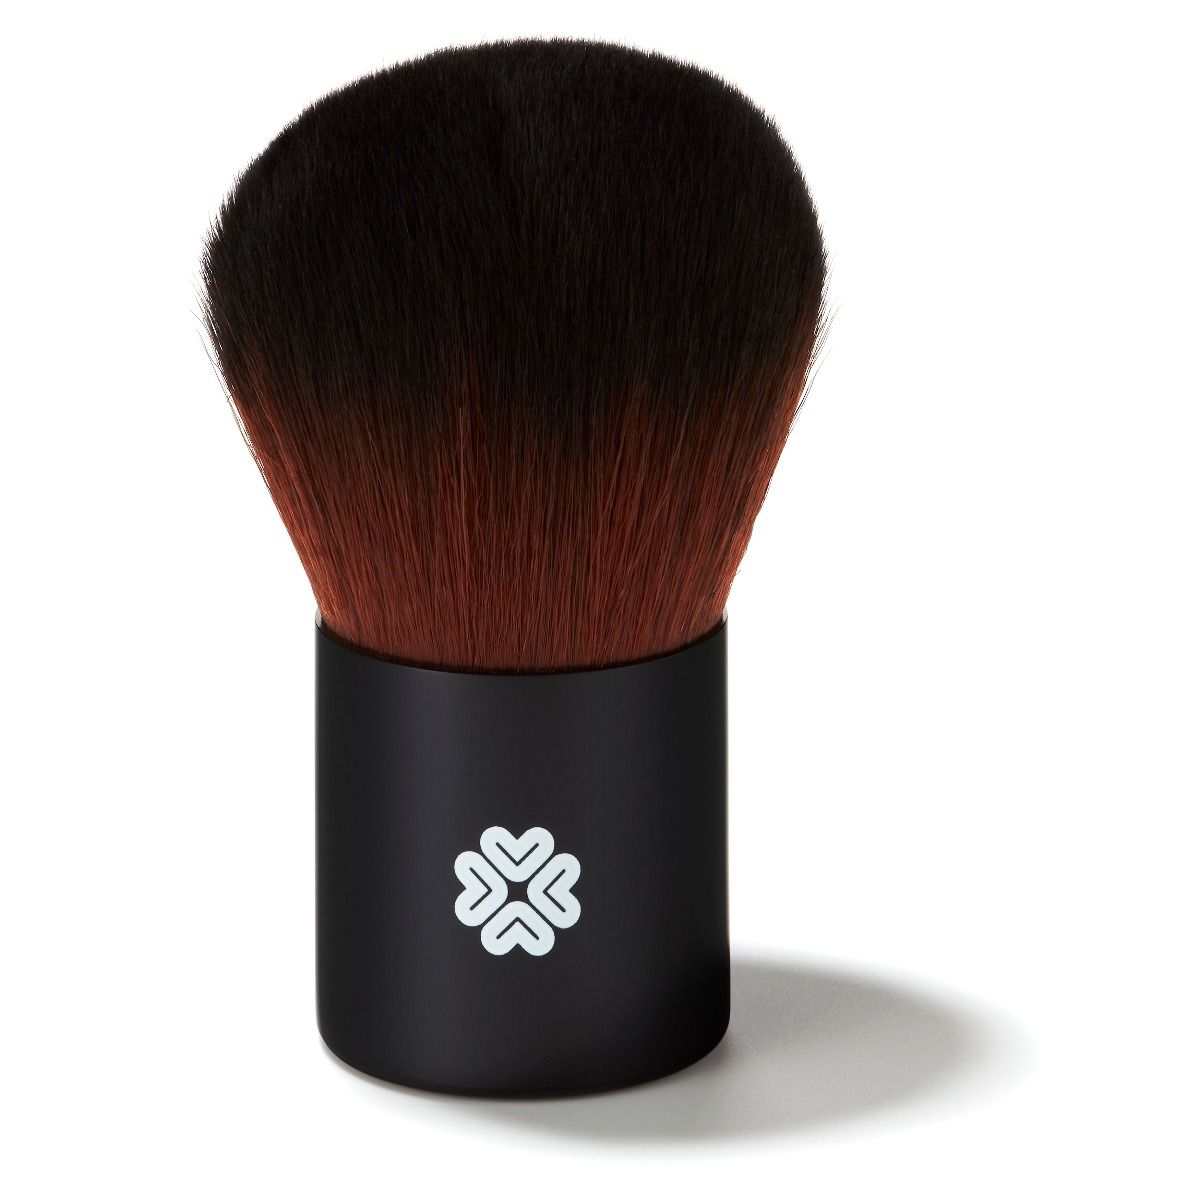 Lily Lolo Super Kabuki Brush: Kabuki brush made from the highest grade synthetic hair that's ultra soft.